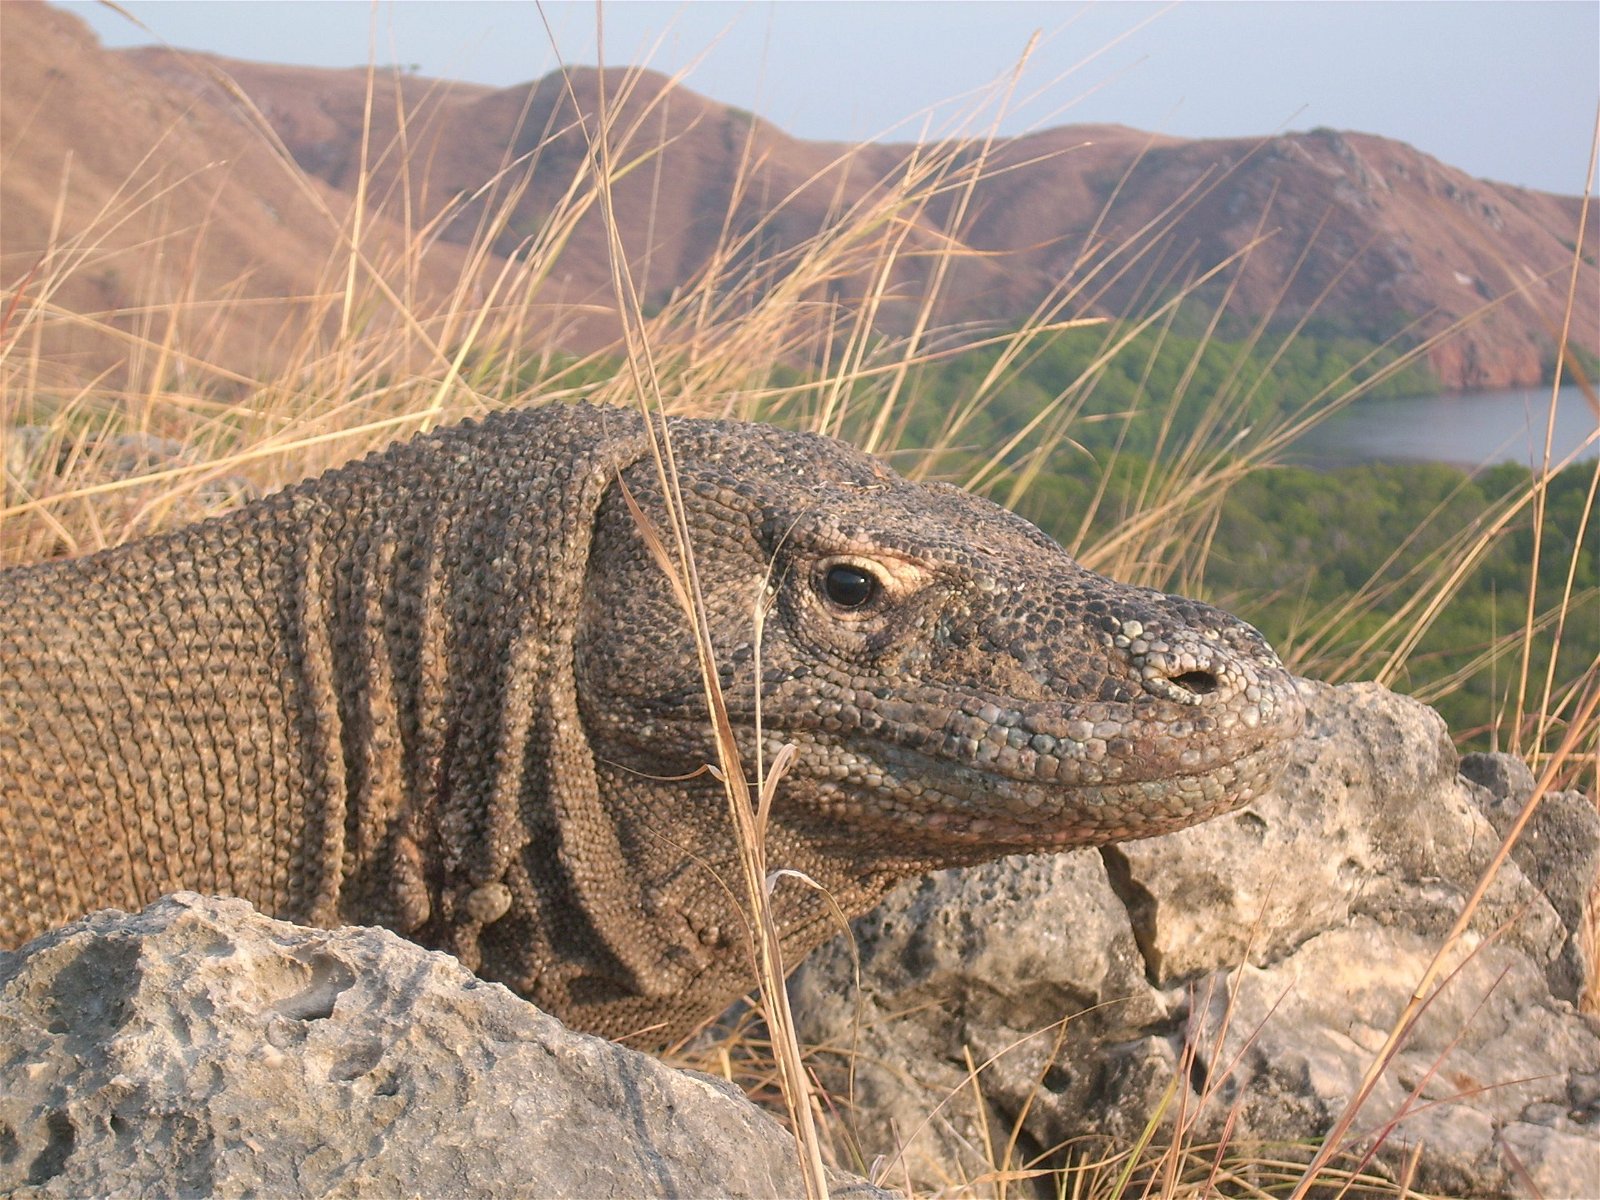 Let's talk about Komodo dragons! | About New7Wonders